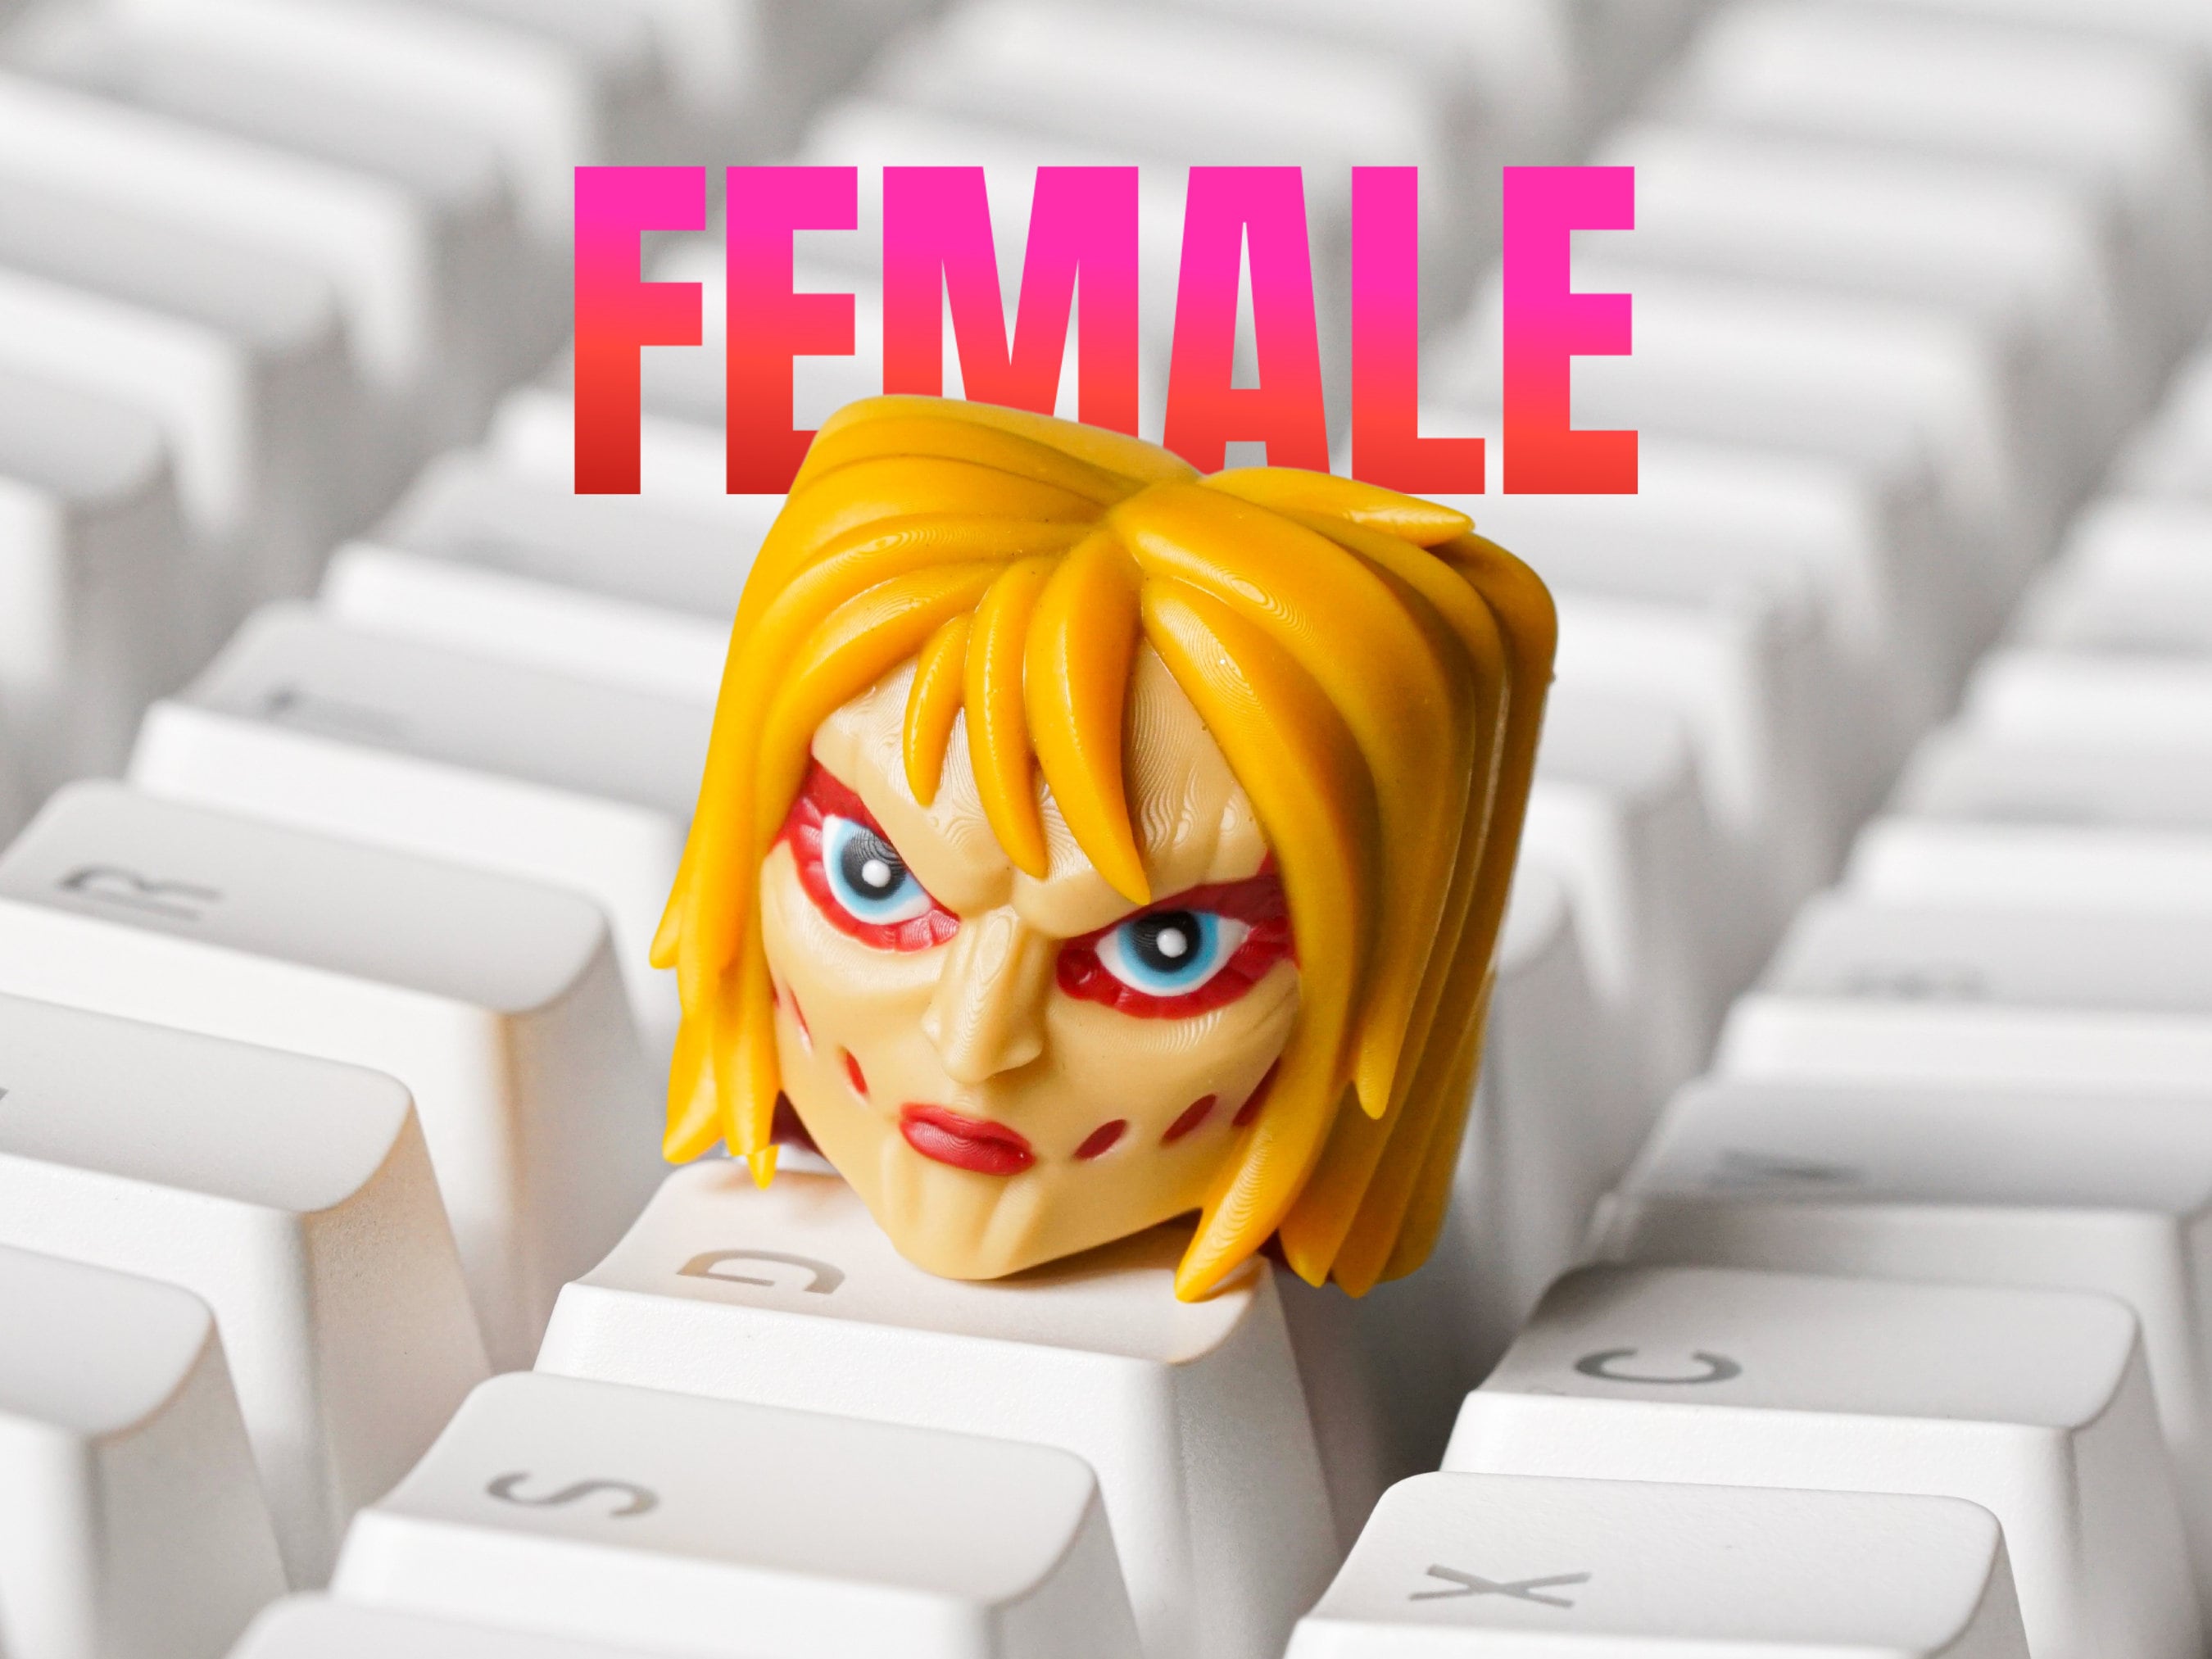 Fe-male Ti.tan Keycap, A.O.T Keycap, Anime Keycap, Keycap for MX Cherry Switches Mechanical Keyboard, Handmade Anime Gift